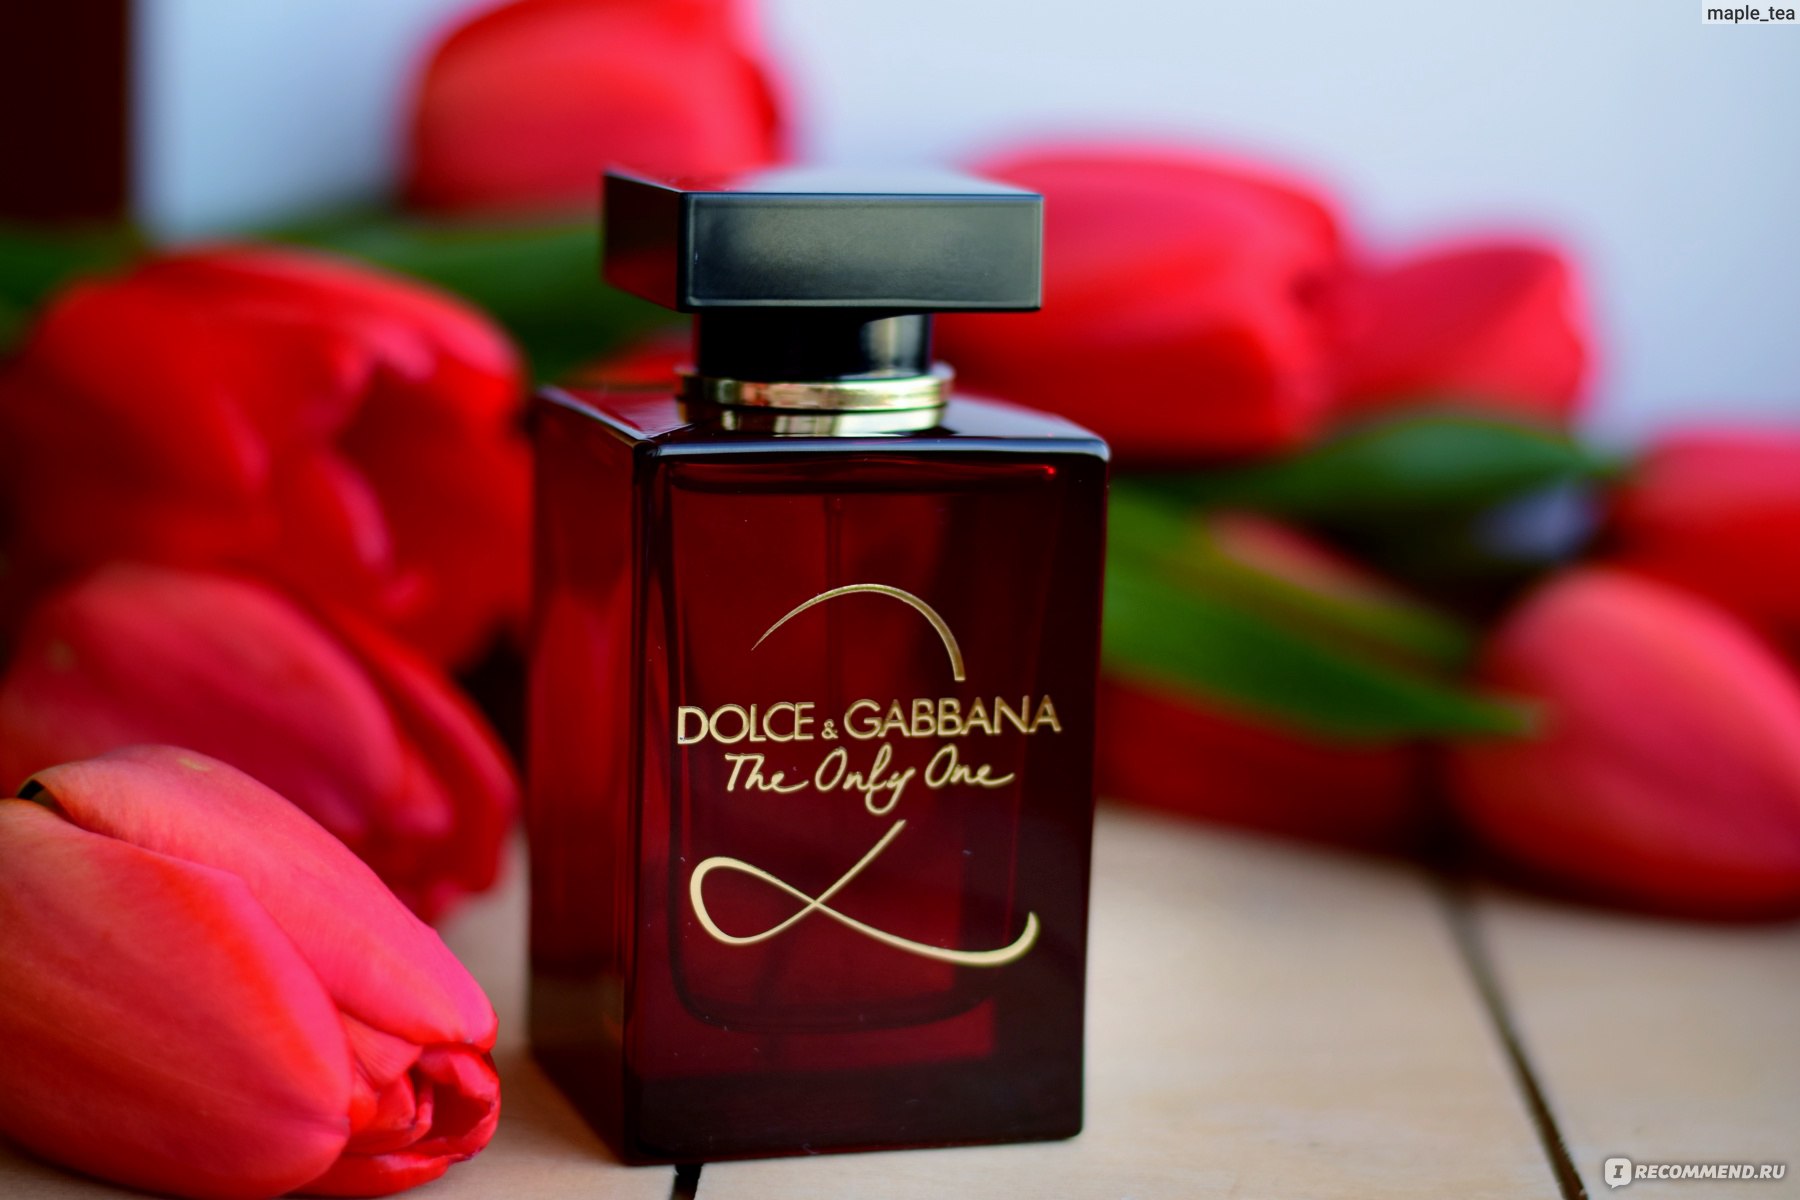 The only one intense dolce. Dolce Gabbana the only one 2. Духи Дольче Габбана Онли Ван. Dolce Gabbana the only one аромат. Dolce Gabbana the only one intense женские.